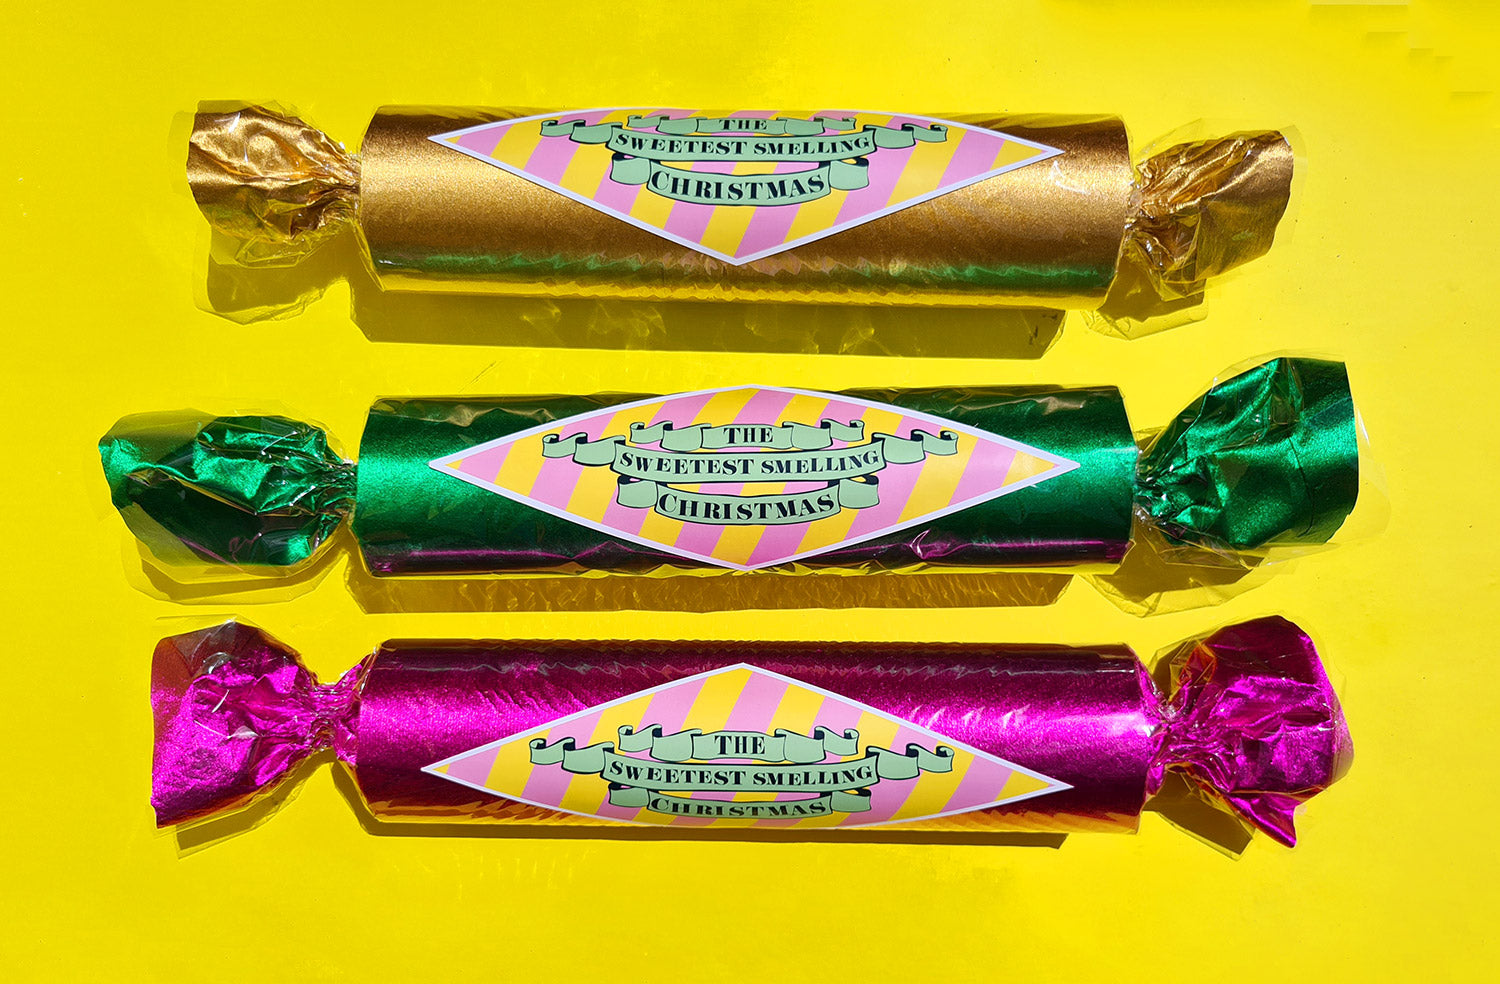 Three, giant wrapped candies in metallic pink, gold and green, with retro-style labels sit on a yellow background. 